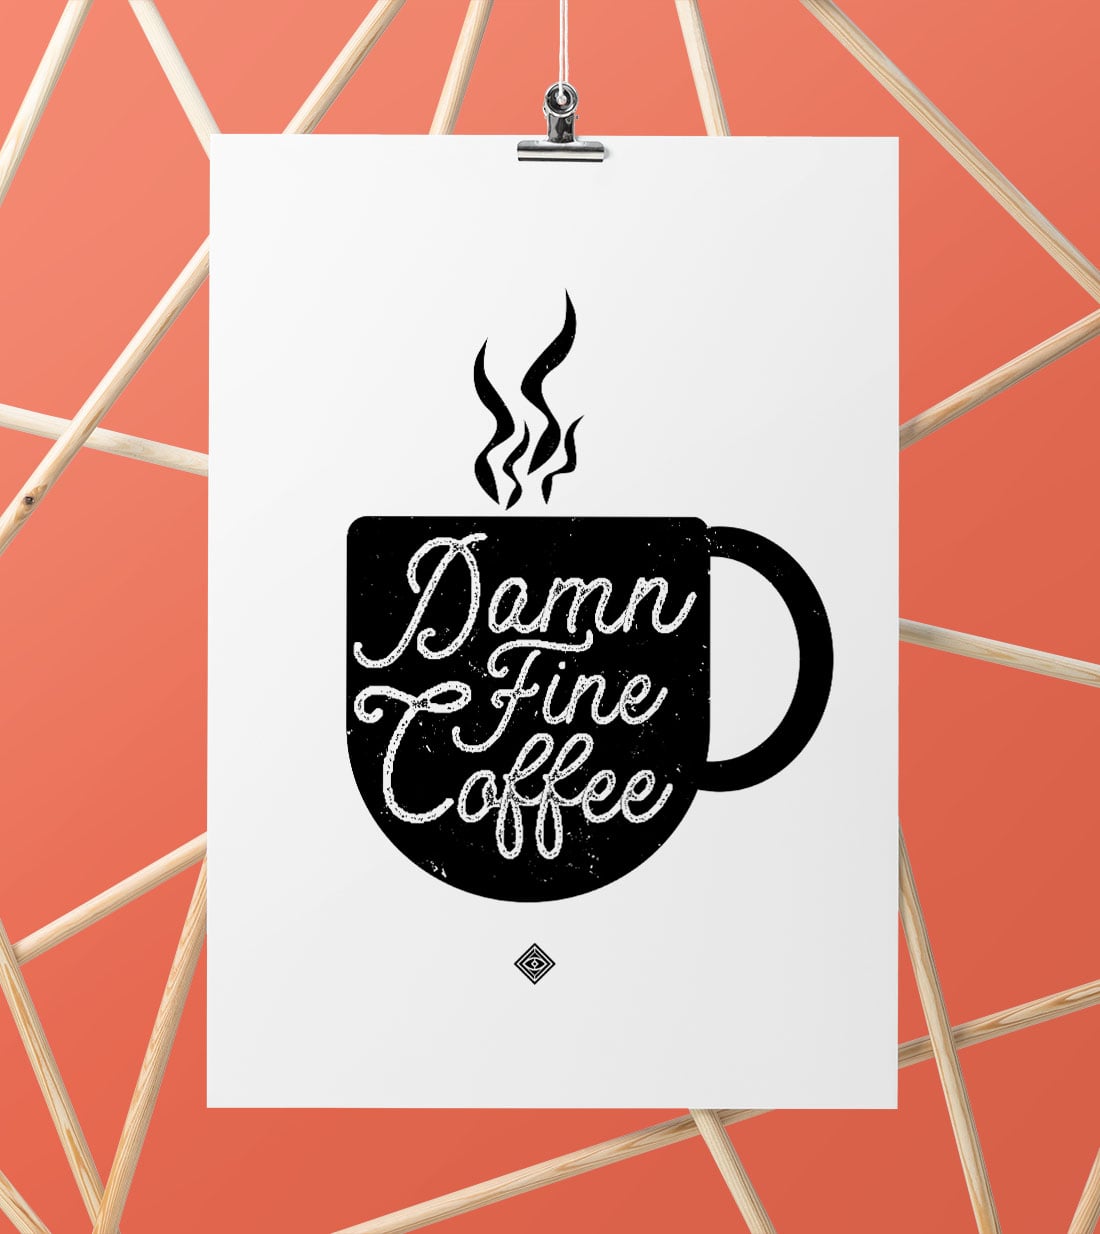 Damn Fine Coffee Free Printable • Little Gold Pixel • Download this Twin Peaks inspired free printable as part of my Freebie Friday series. Instant wall art! Bonus: watch the time-lapse video to see how I made it.